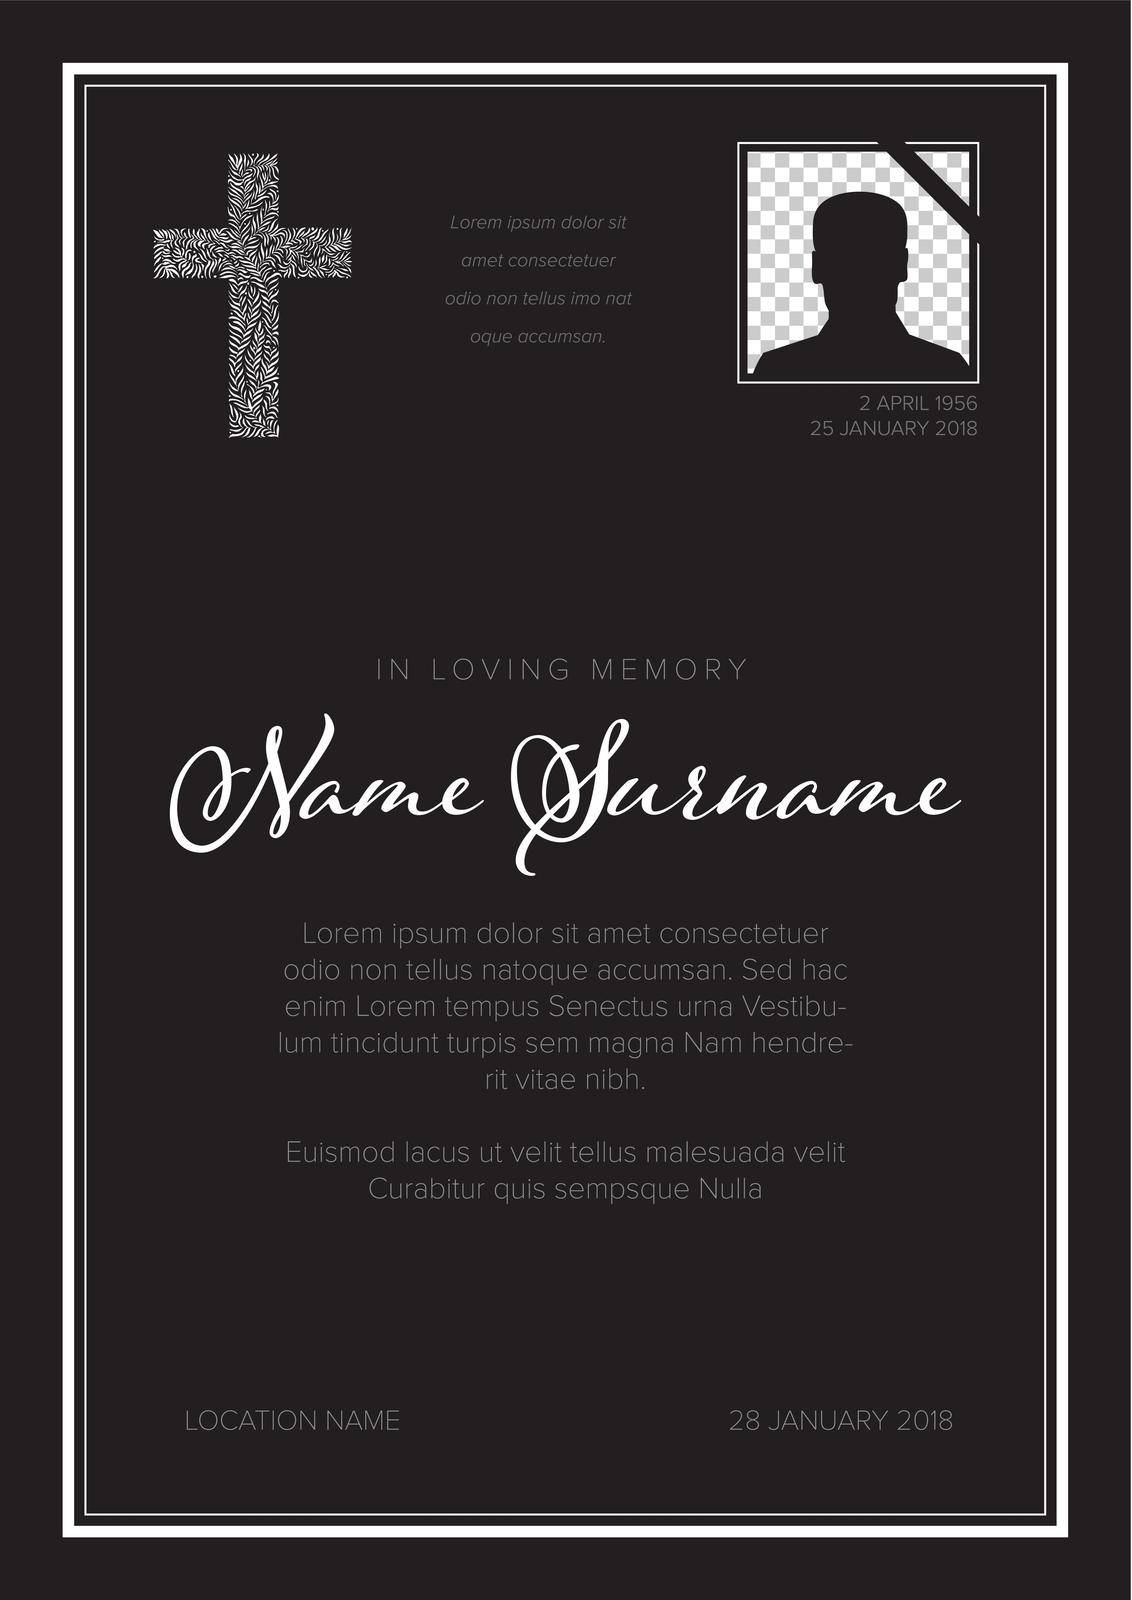 Funeral condolence death notice card template with white elements and photo placeholder on black background